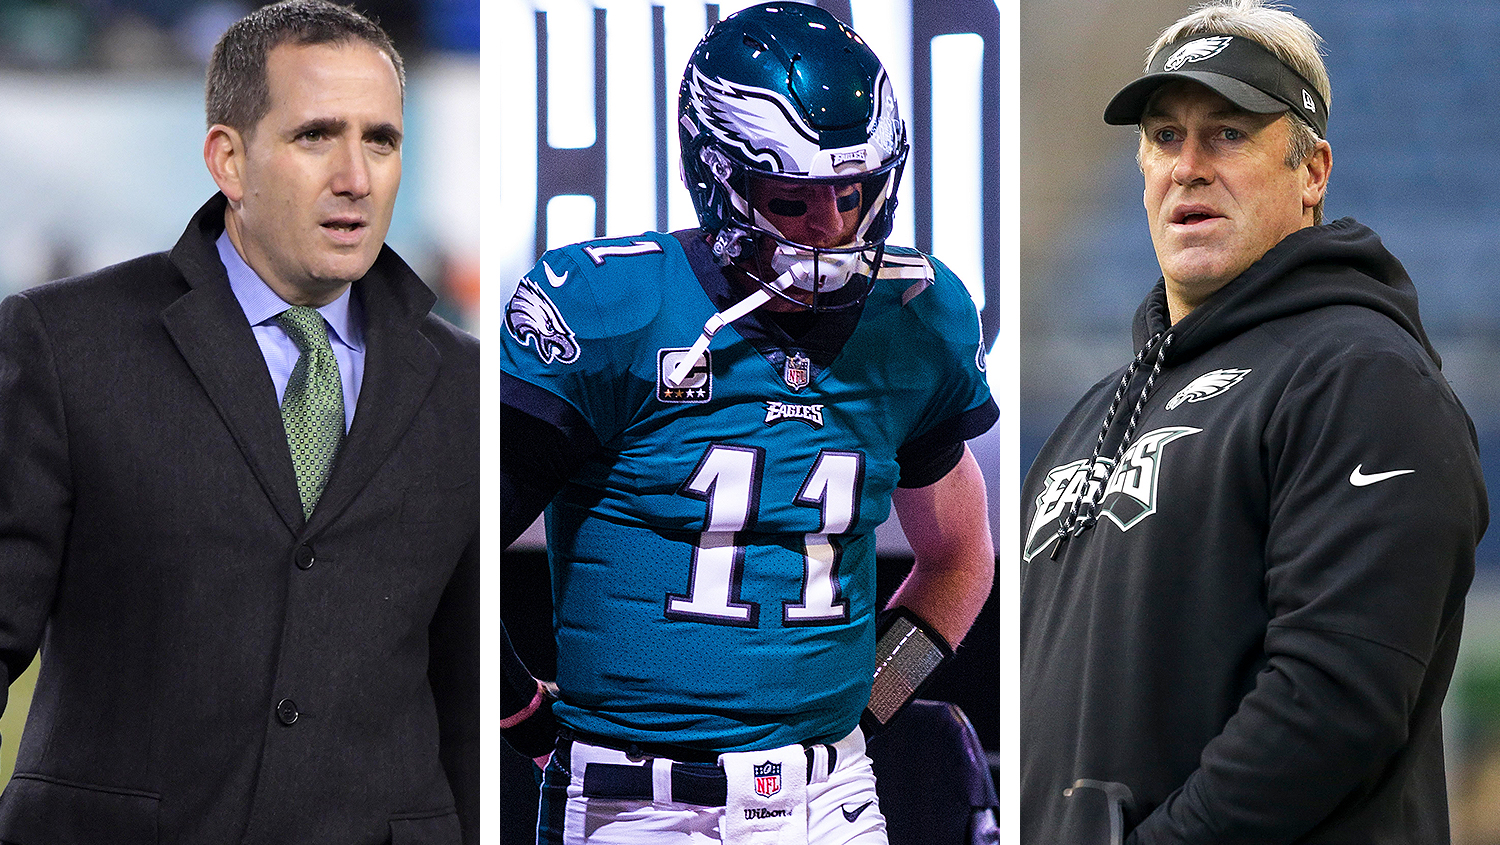 Can Howie Roseman right the ship?